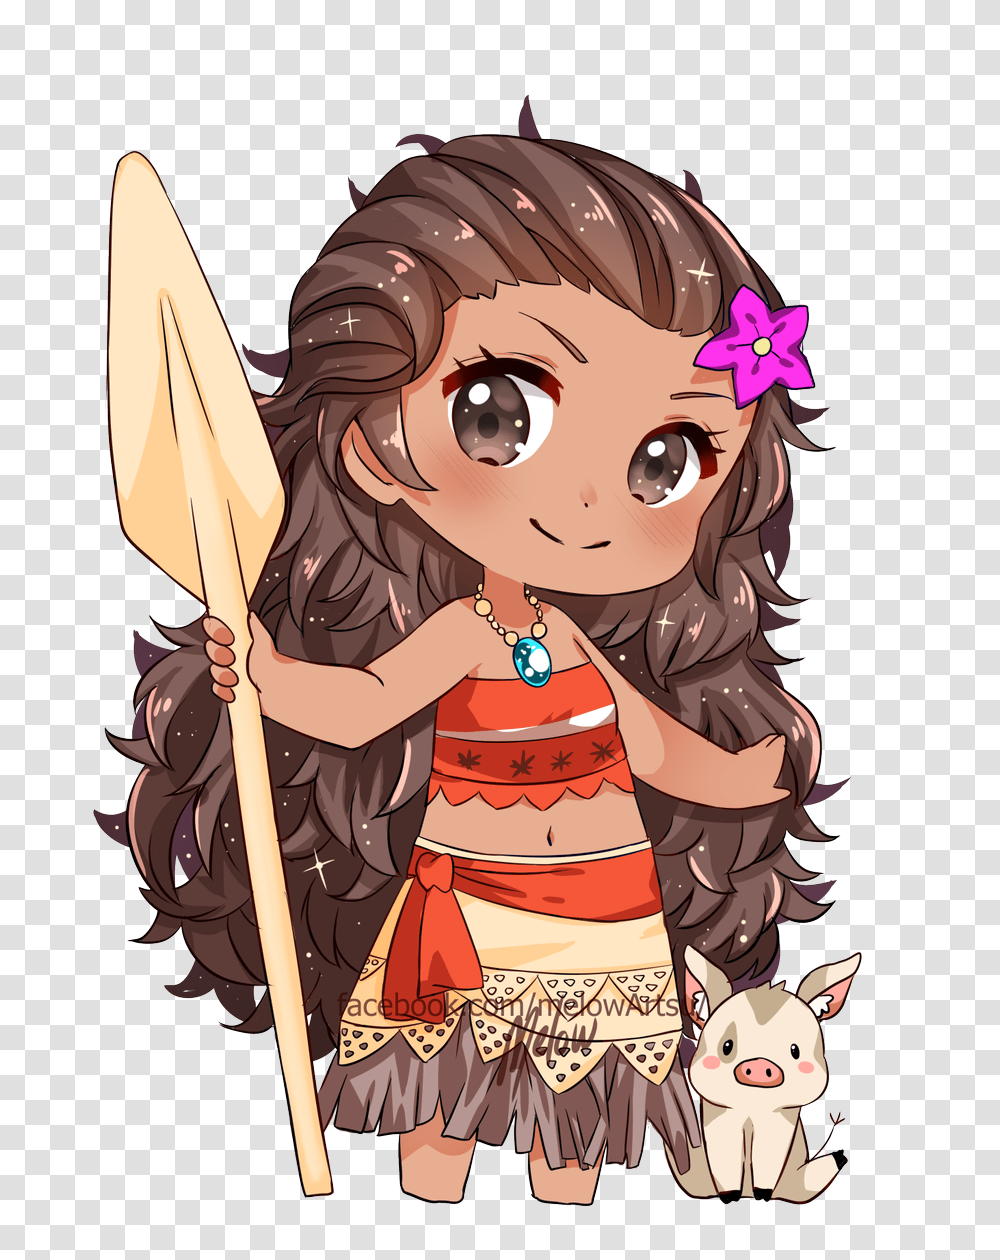 Tangled Pascal On Moana En Anime 3274215 Vippng Moana Anime, Costume, Person, Human, Clothing Transparent Png